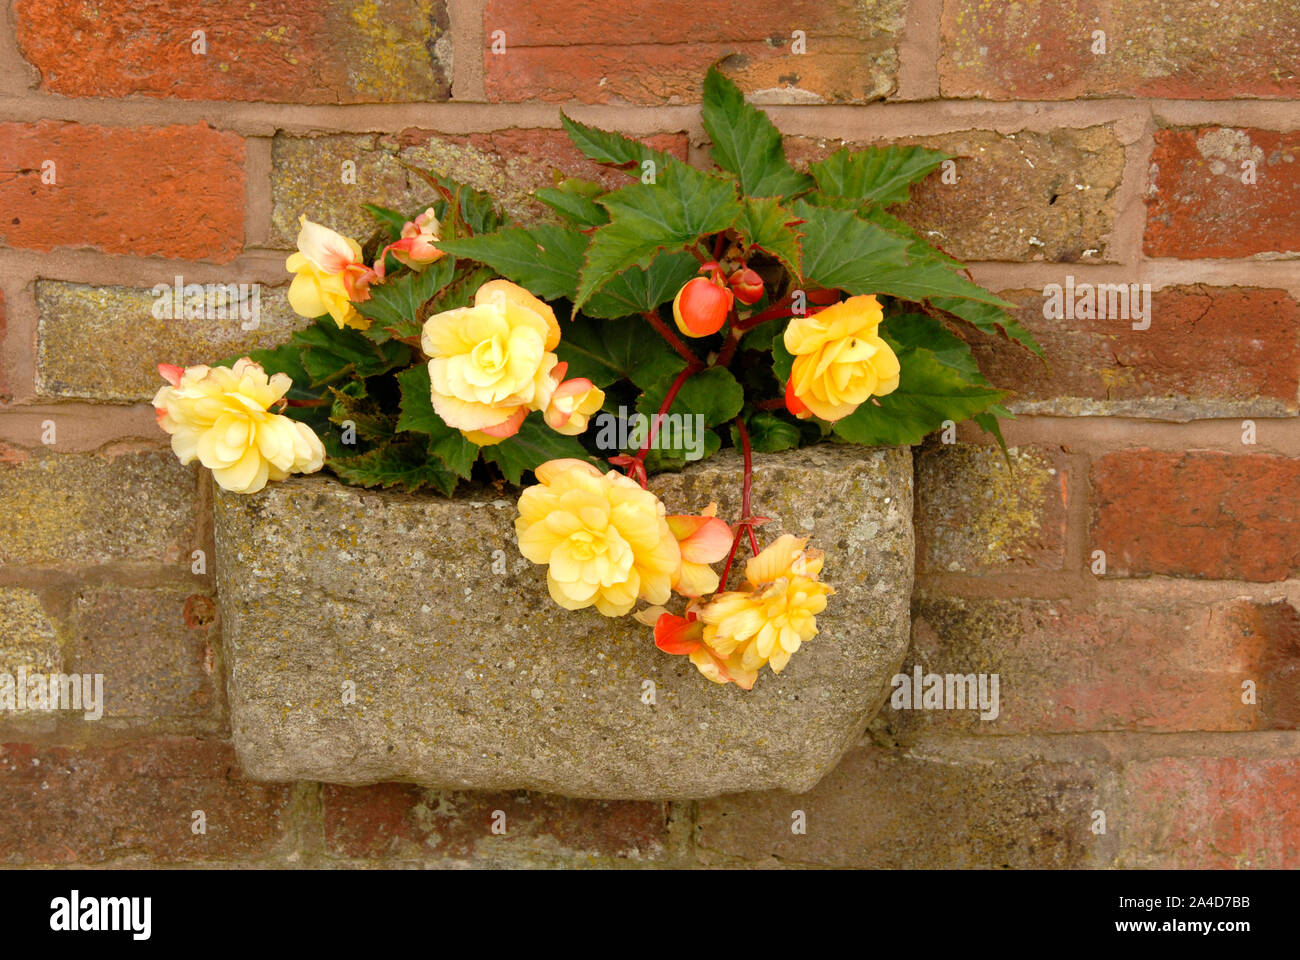 Small trough, moulded in concrete, to hold flowers and integrated into a wall Stock Photo